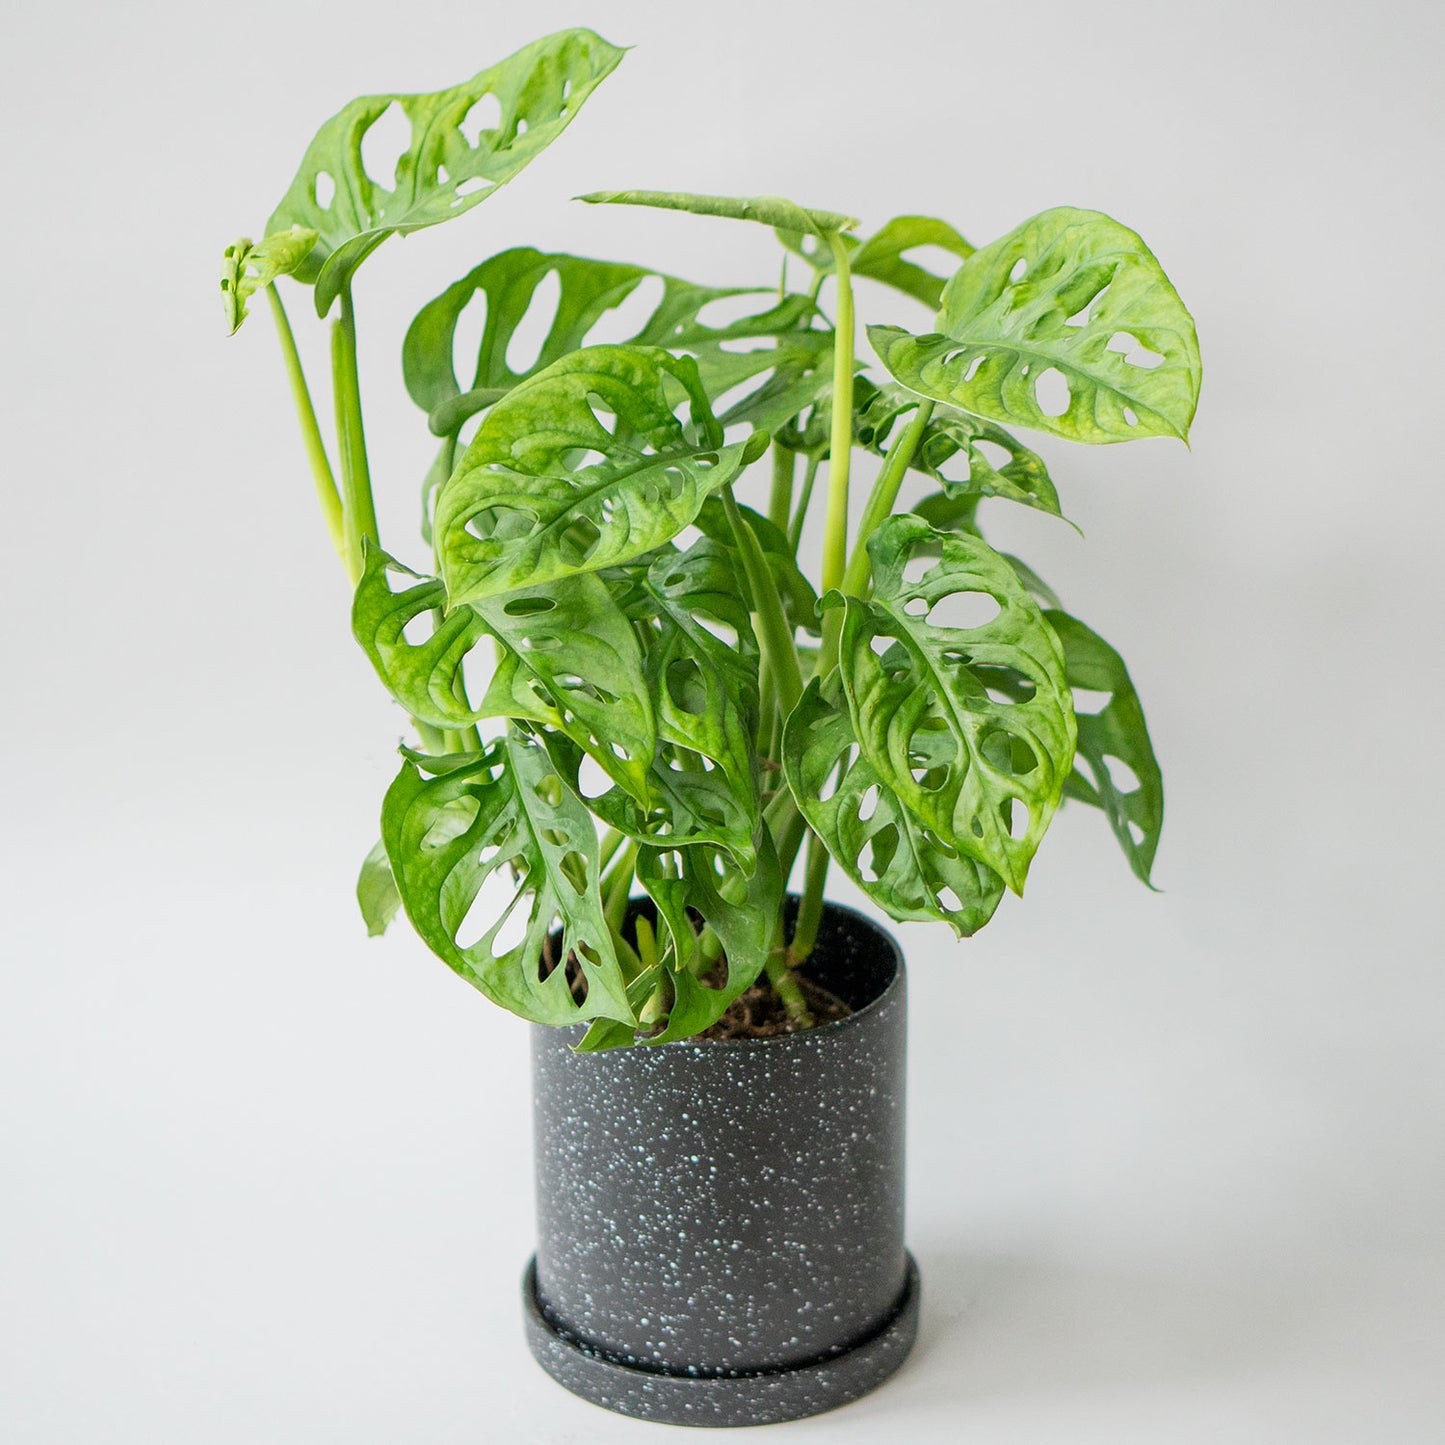 Potted Monstera Swiss Cheese - Best Quality Easy-Care Houseplant Monstera Adansonii Obliqua 6” - Buy repotted indoor plant Monstera Adansonii Swiss Cheese for delivery at Planteia